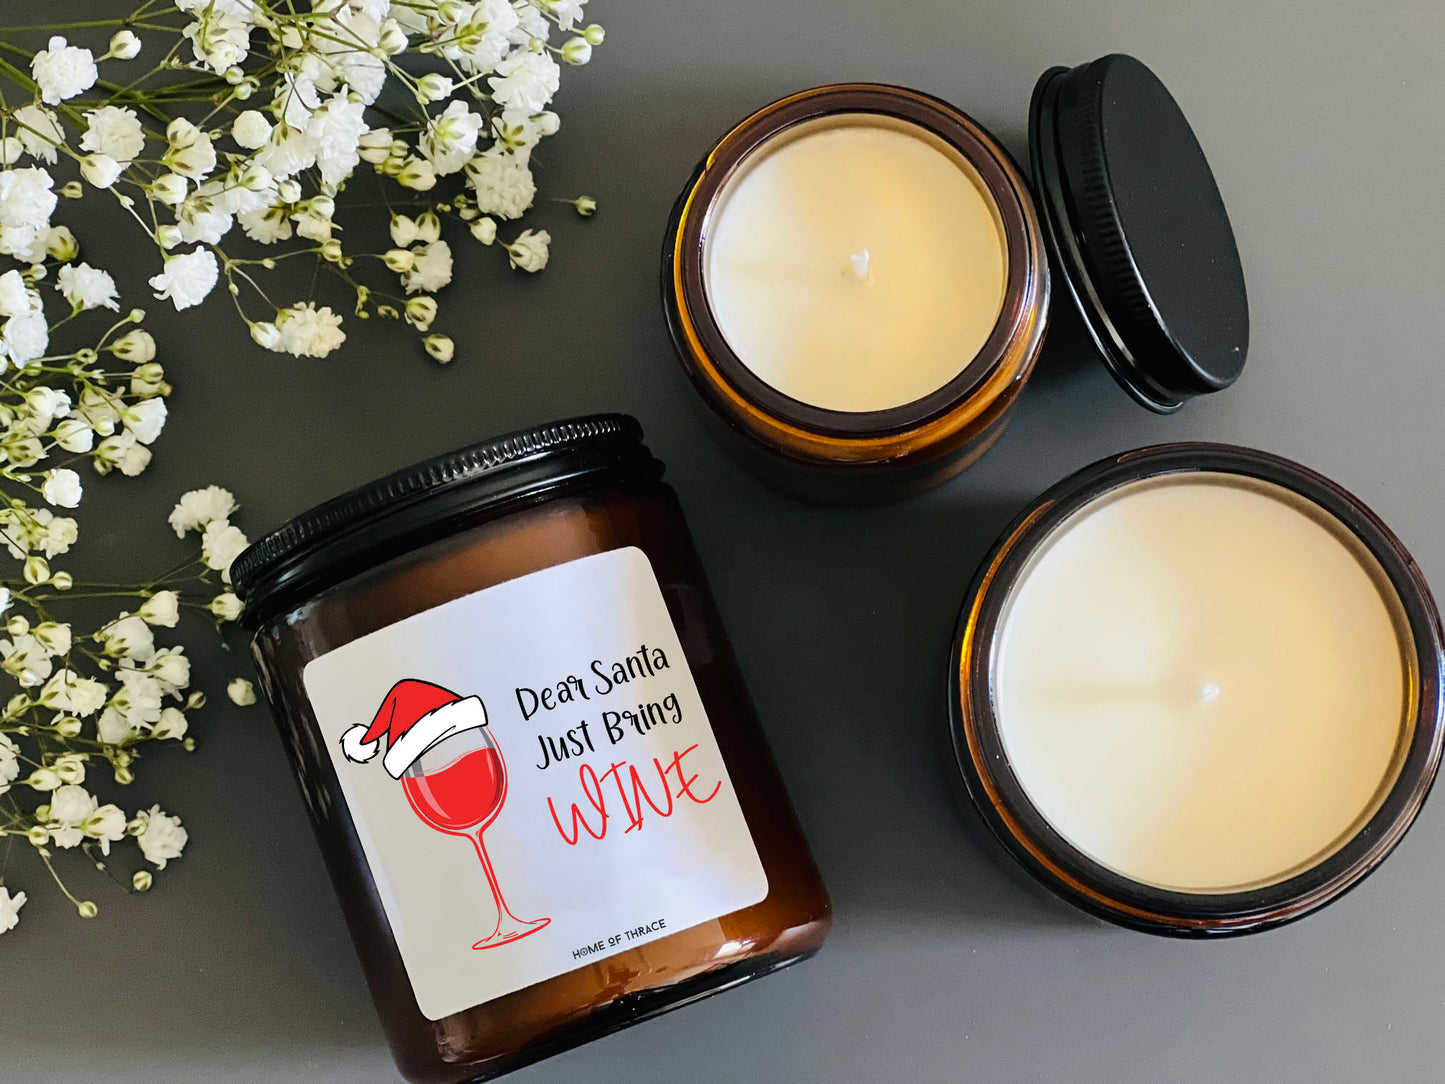 Dear Santa Just Bring Wine Candle Funny Christmas Gift Ideas